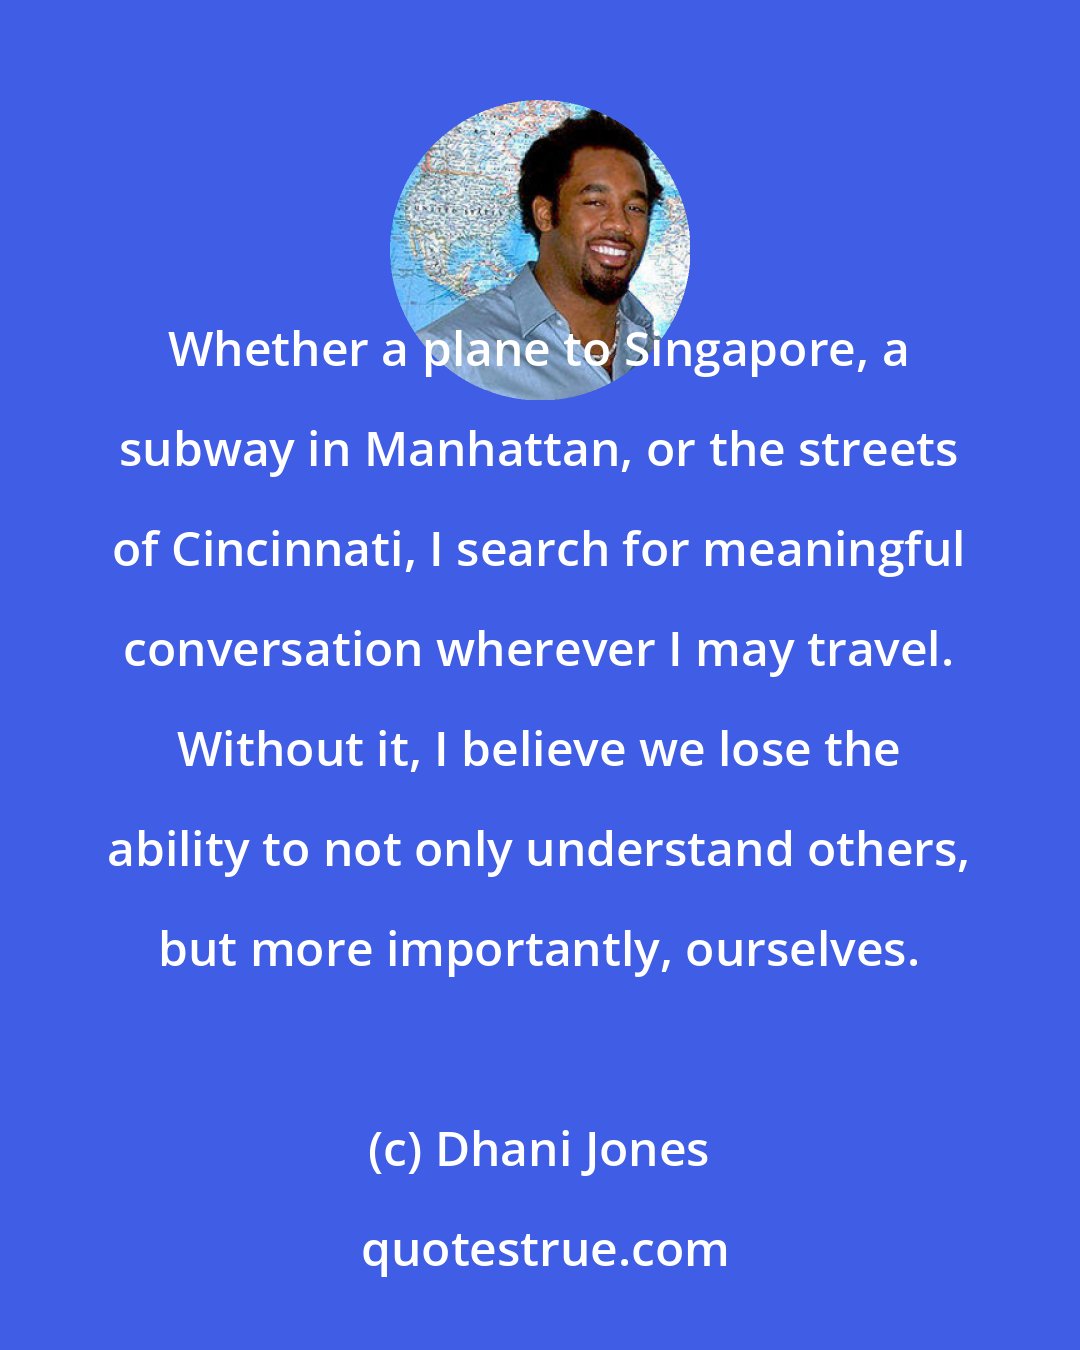 Dhani Jones: Whether a plane to Singapore, a subway in Manhattan, or the streets of Cincinnati, I search for meaningful conversation wherever I may travel. Without it, I believe we lose the ability to not only understand others, but more importantly, ourselves.